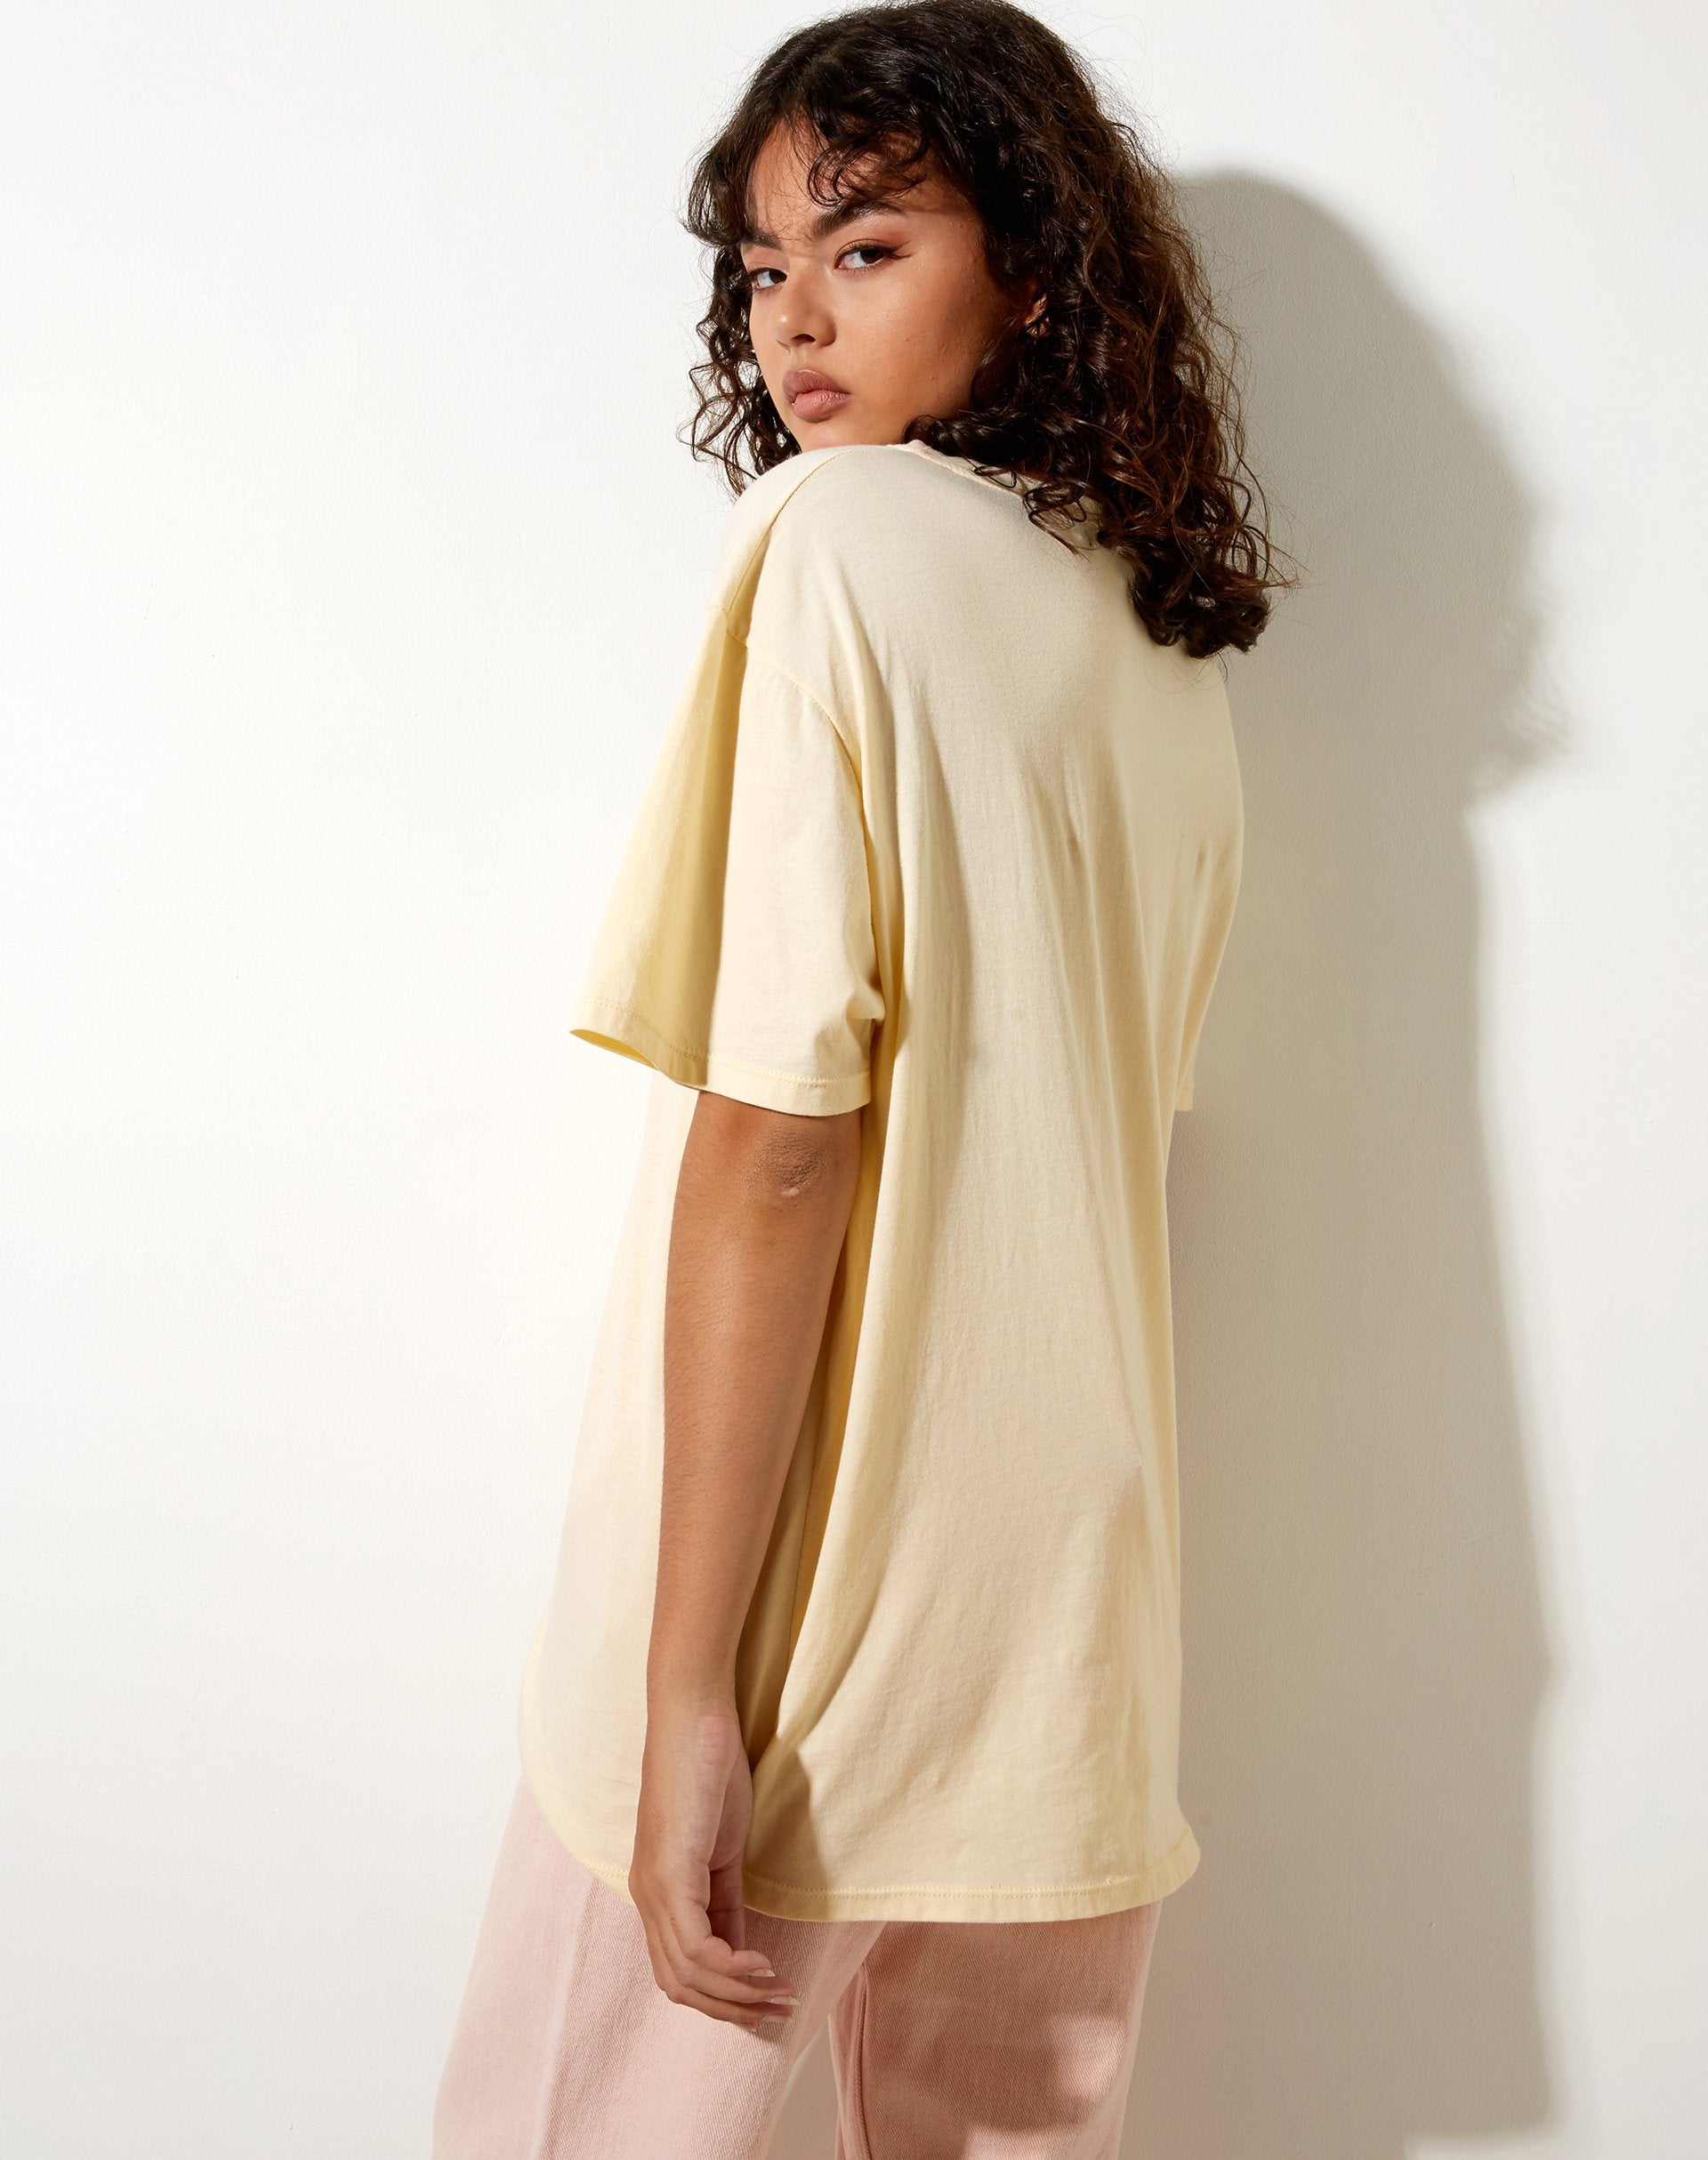 Image of Oversize Basic Tee in Buttercream Pearl Sands